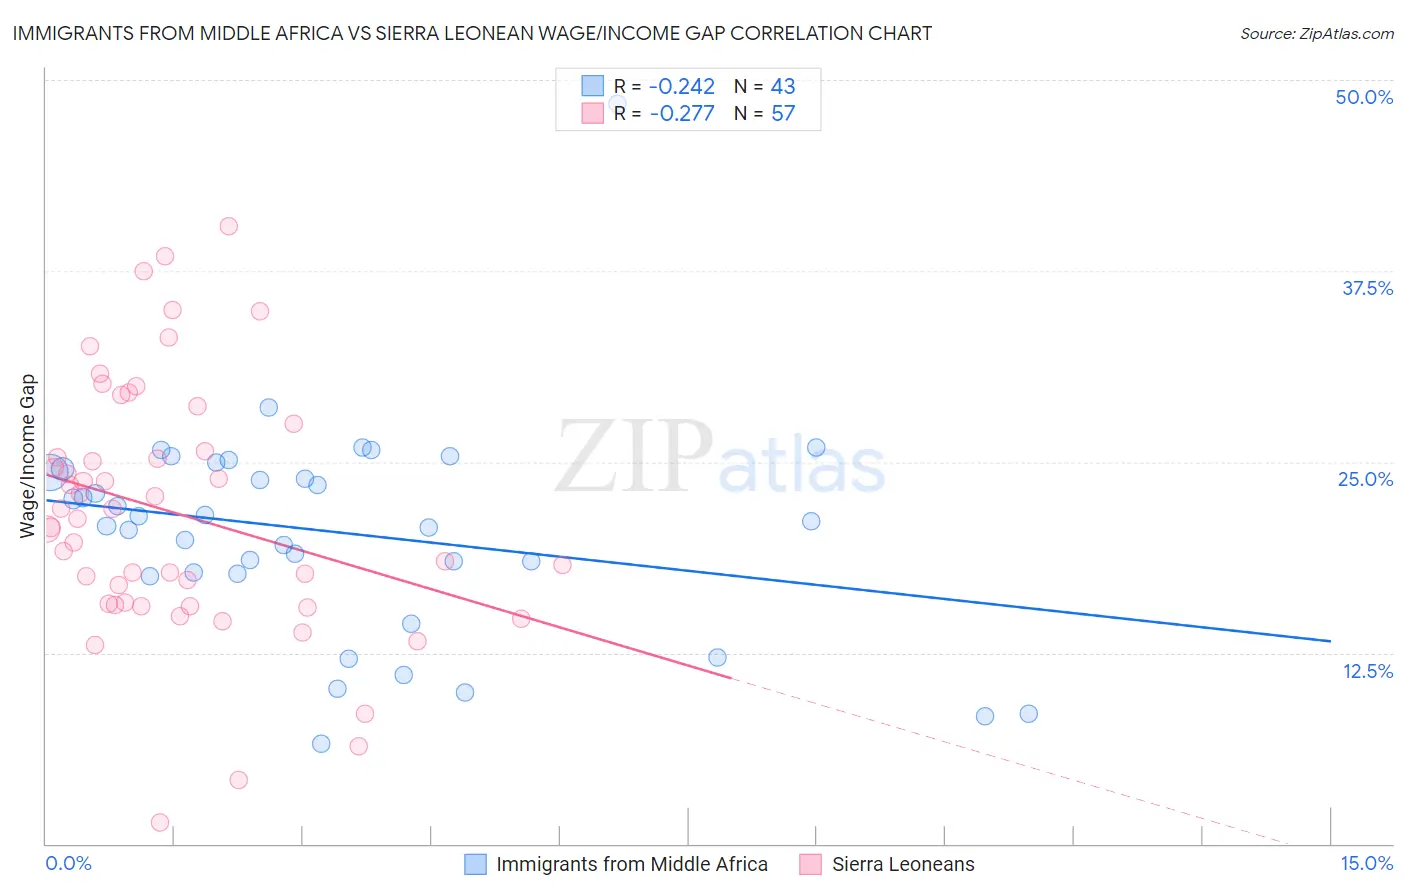 Immigrants from Middle Africa vs Sierra Leonean Wage/Income Gap